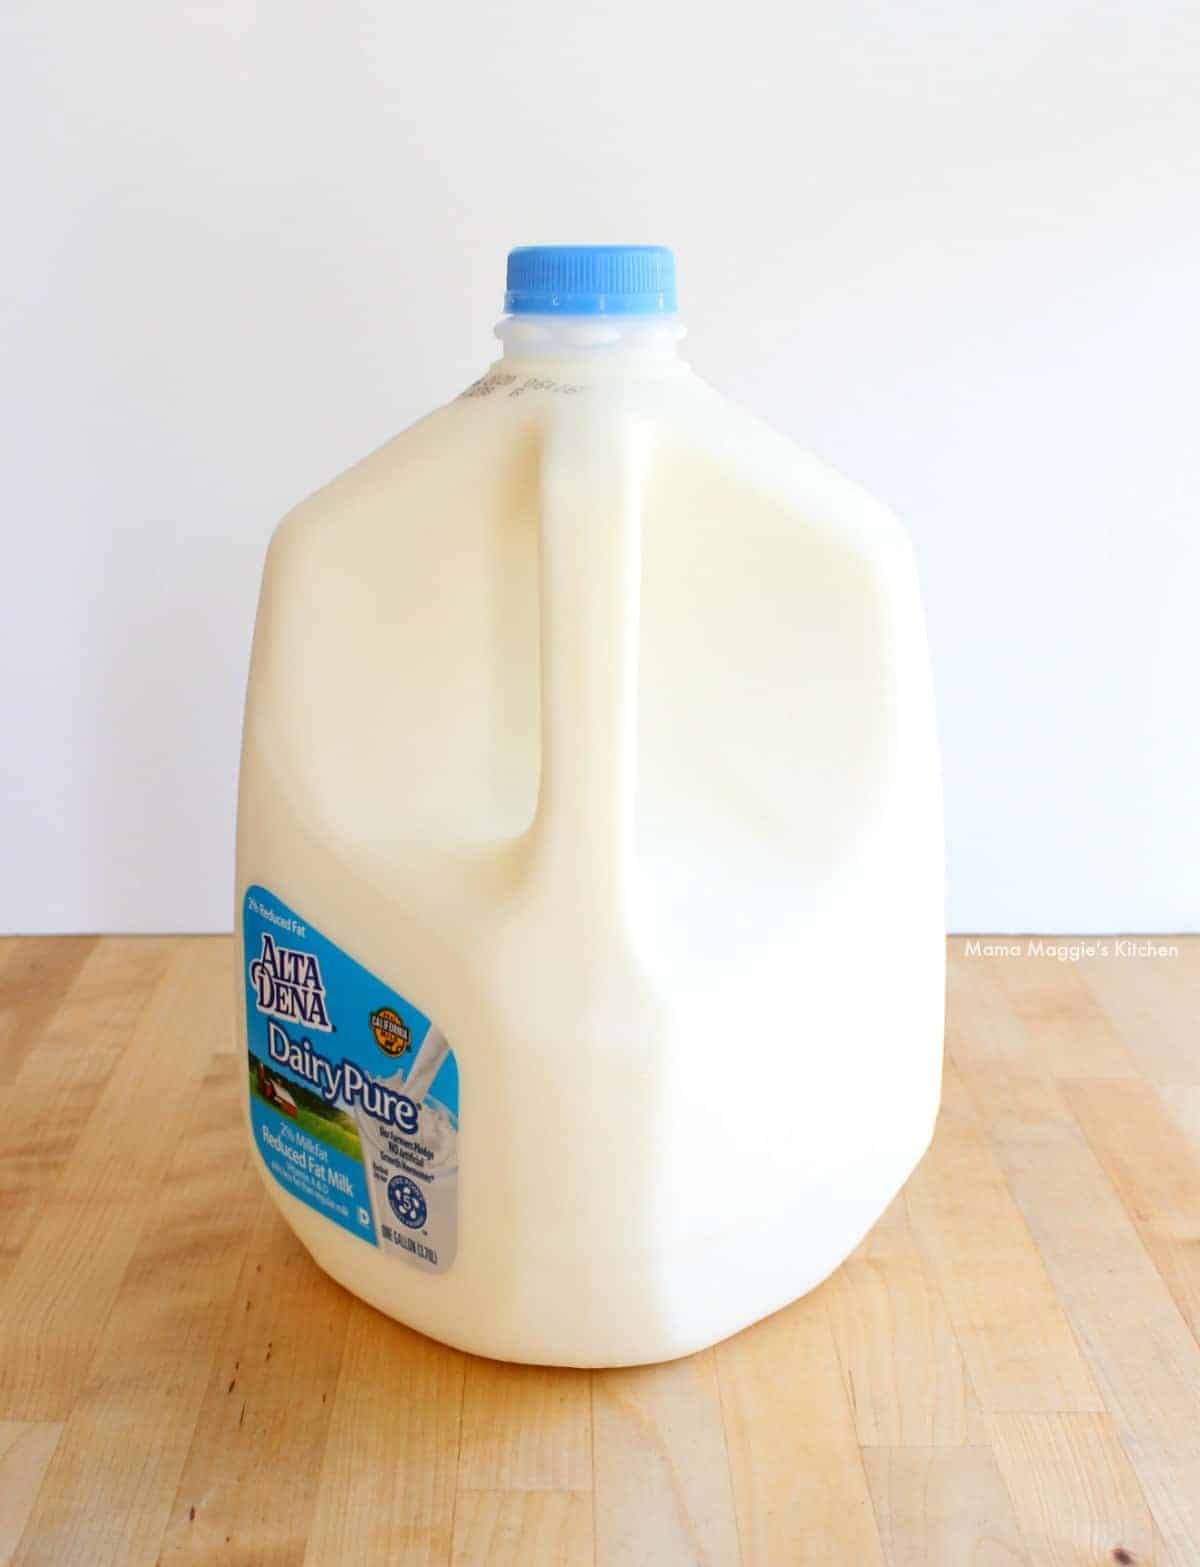 A gallon of milk on a wooden table.